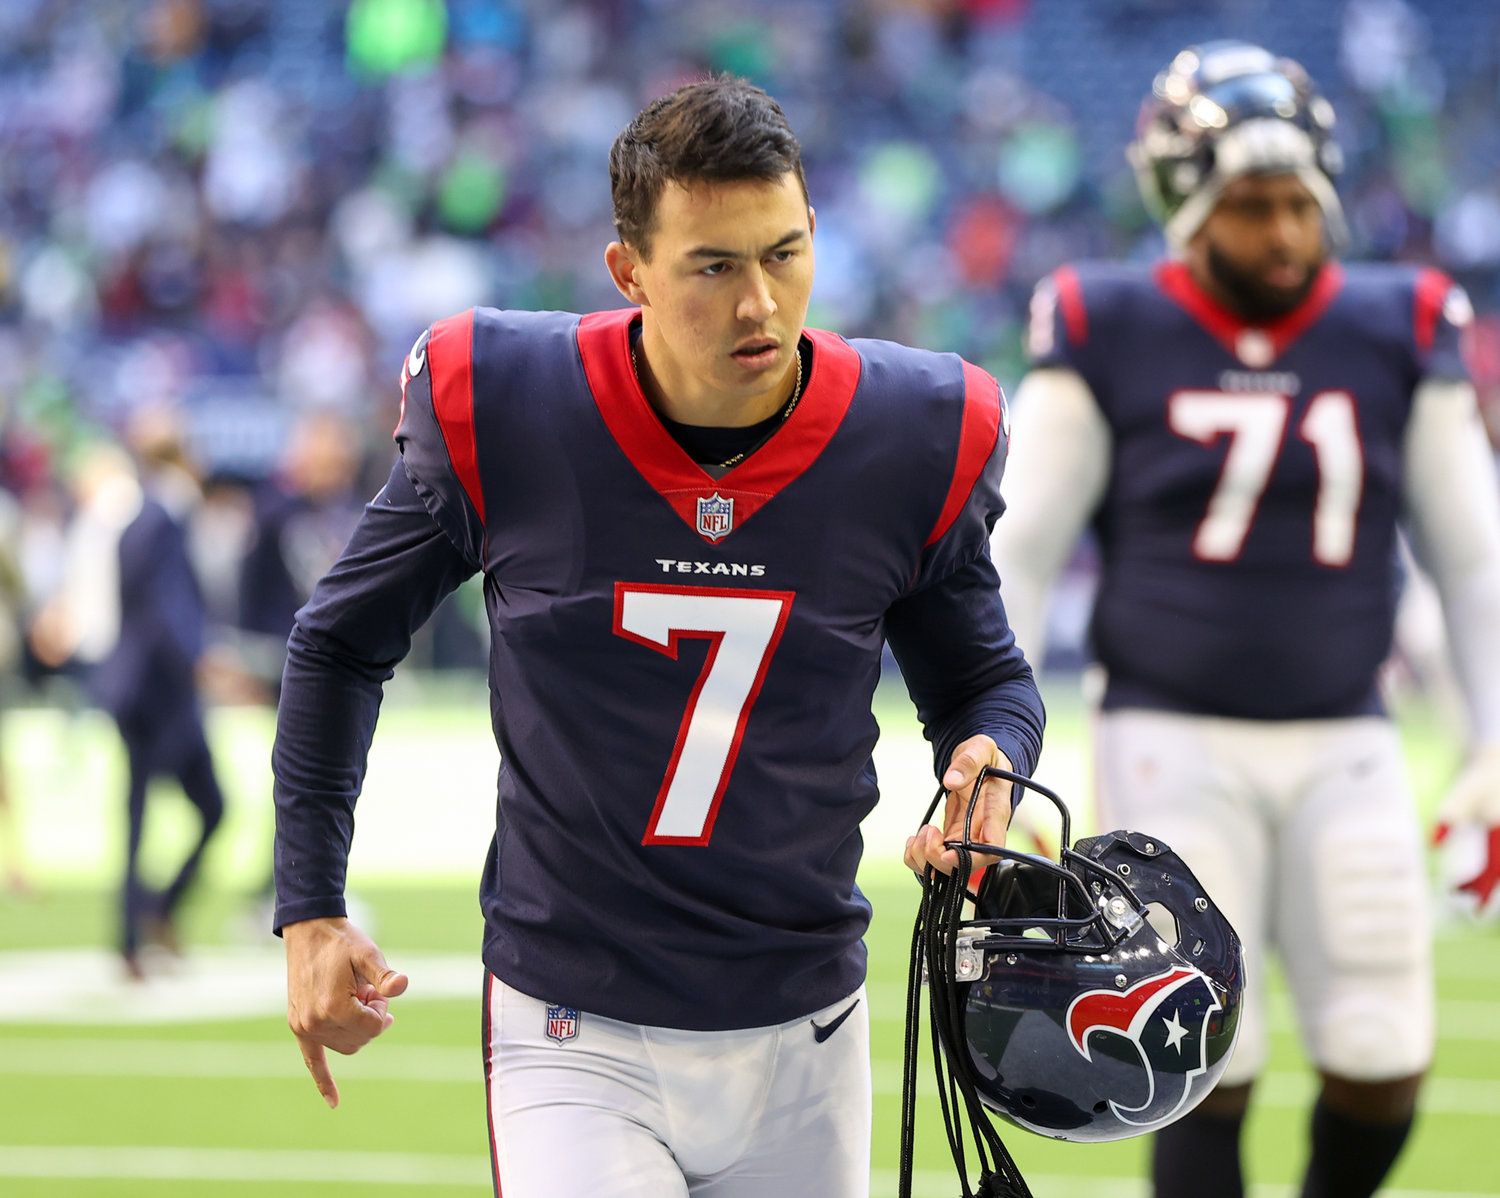 Houston Texans place kicker Ka'imi Fairbairn (7) leaves the field following an NFL game between the Seahawks and the Texans on December 12, 2021 in Houston, Texas. Seattle won, 33-13, but Fairbairn kicked a franchise record 61-yard field goal to end the first half.